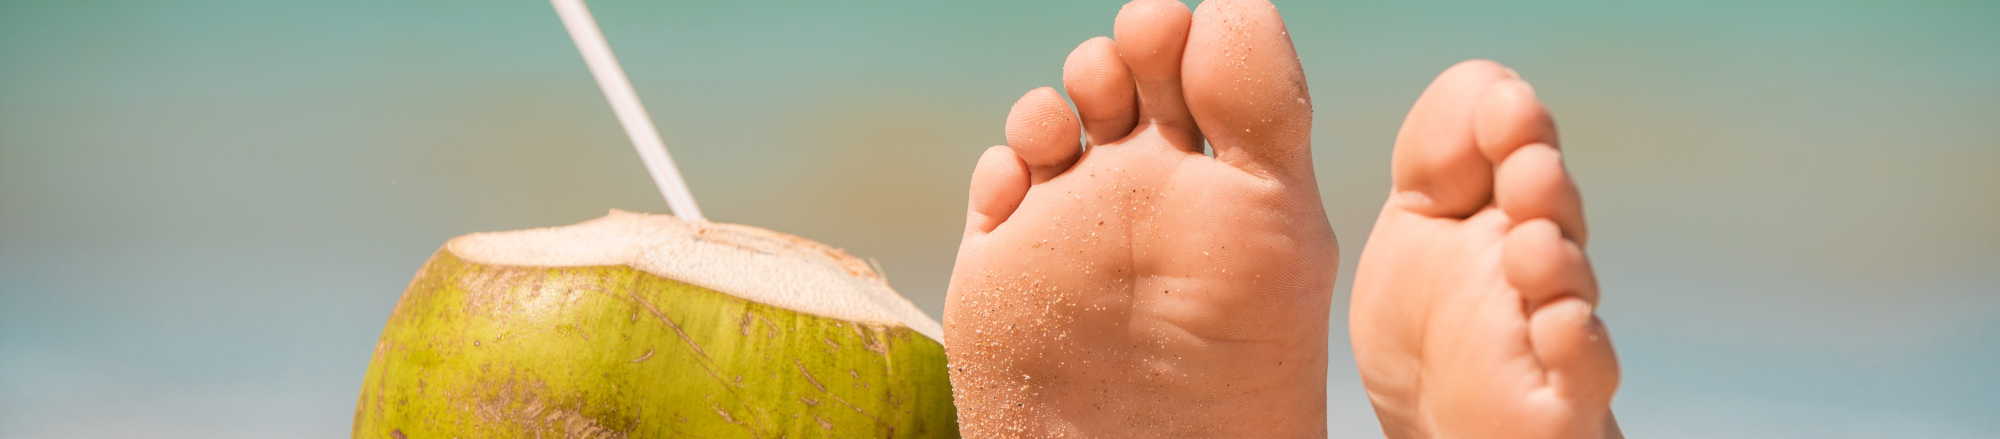 Feet by coconut drink in sand on beach